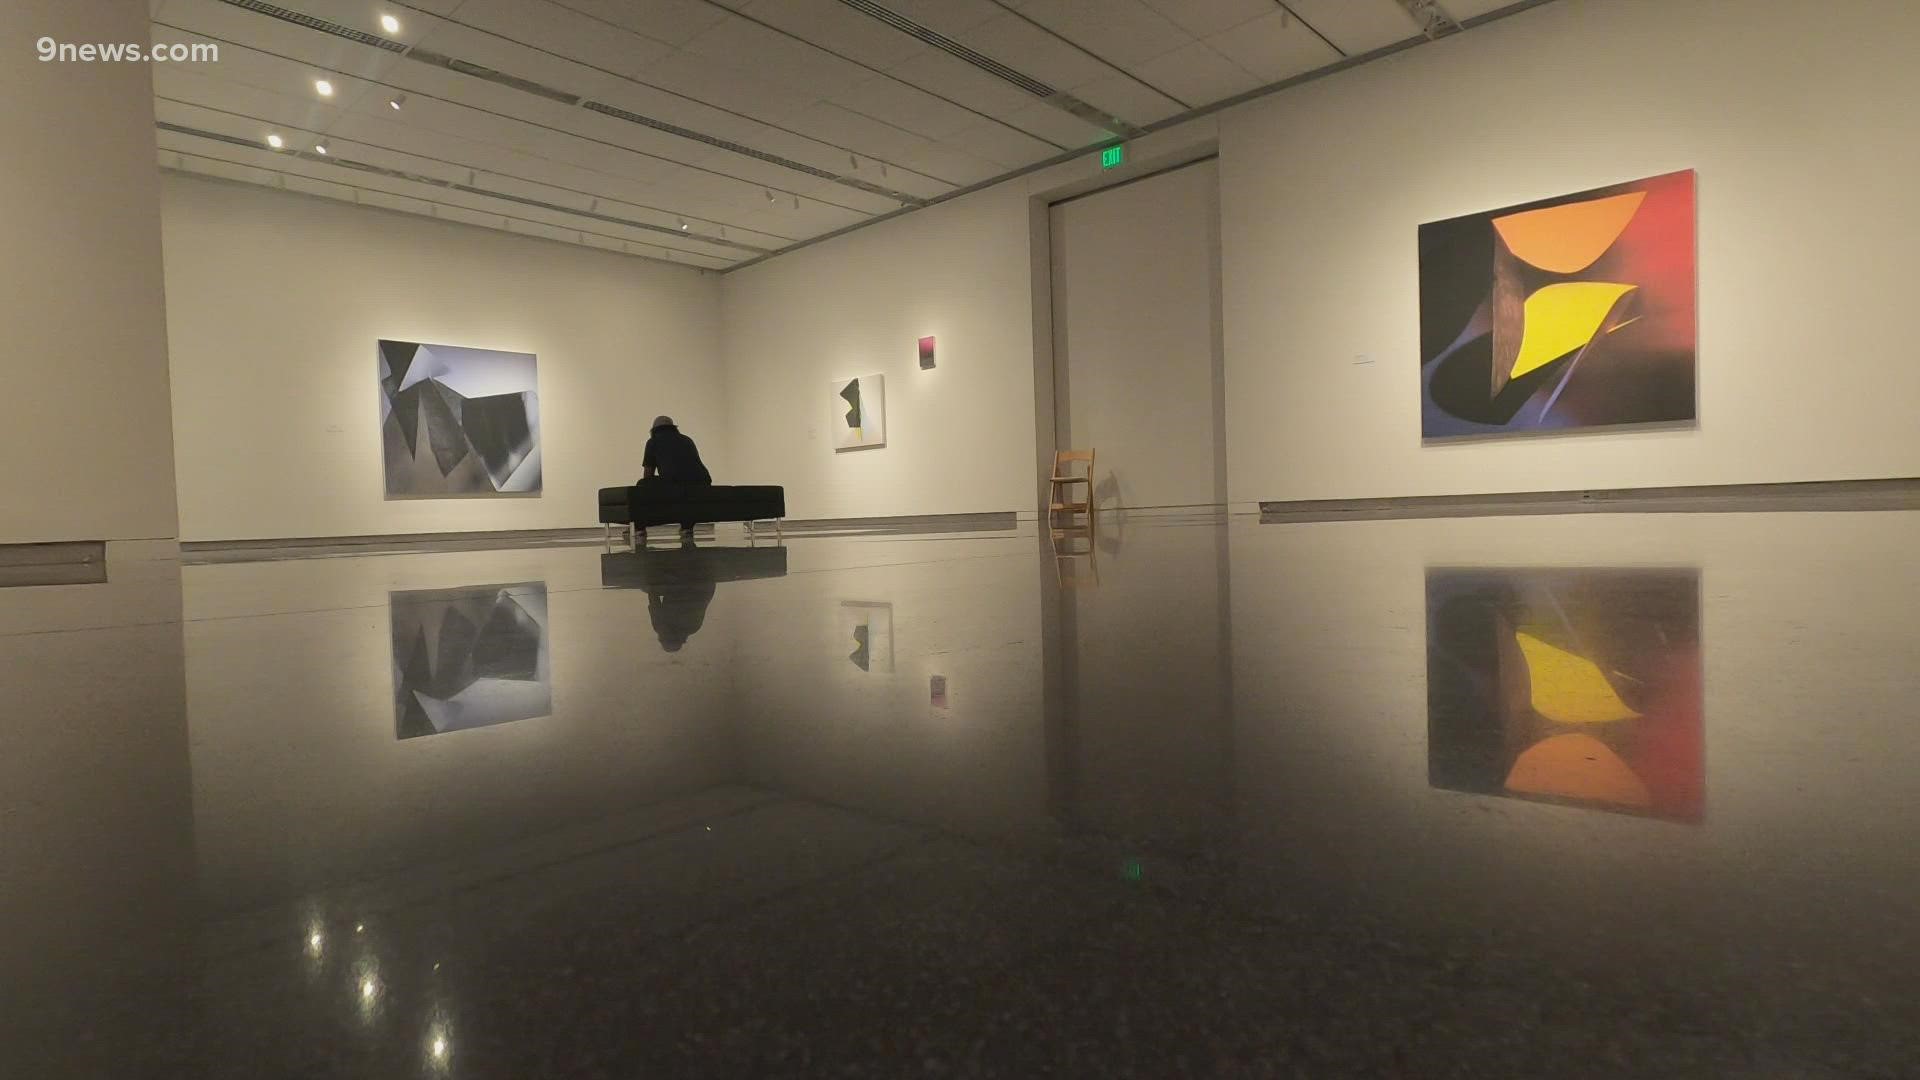 The art galleries at CU Art Museum went dark for 17 months – and they took the time to reevaluate how they wanted to do things when they reopened.